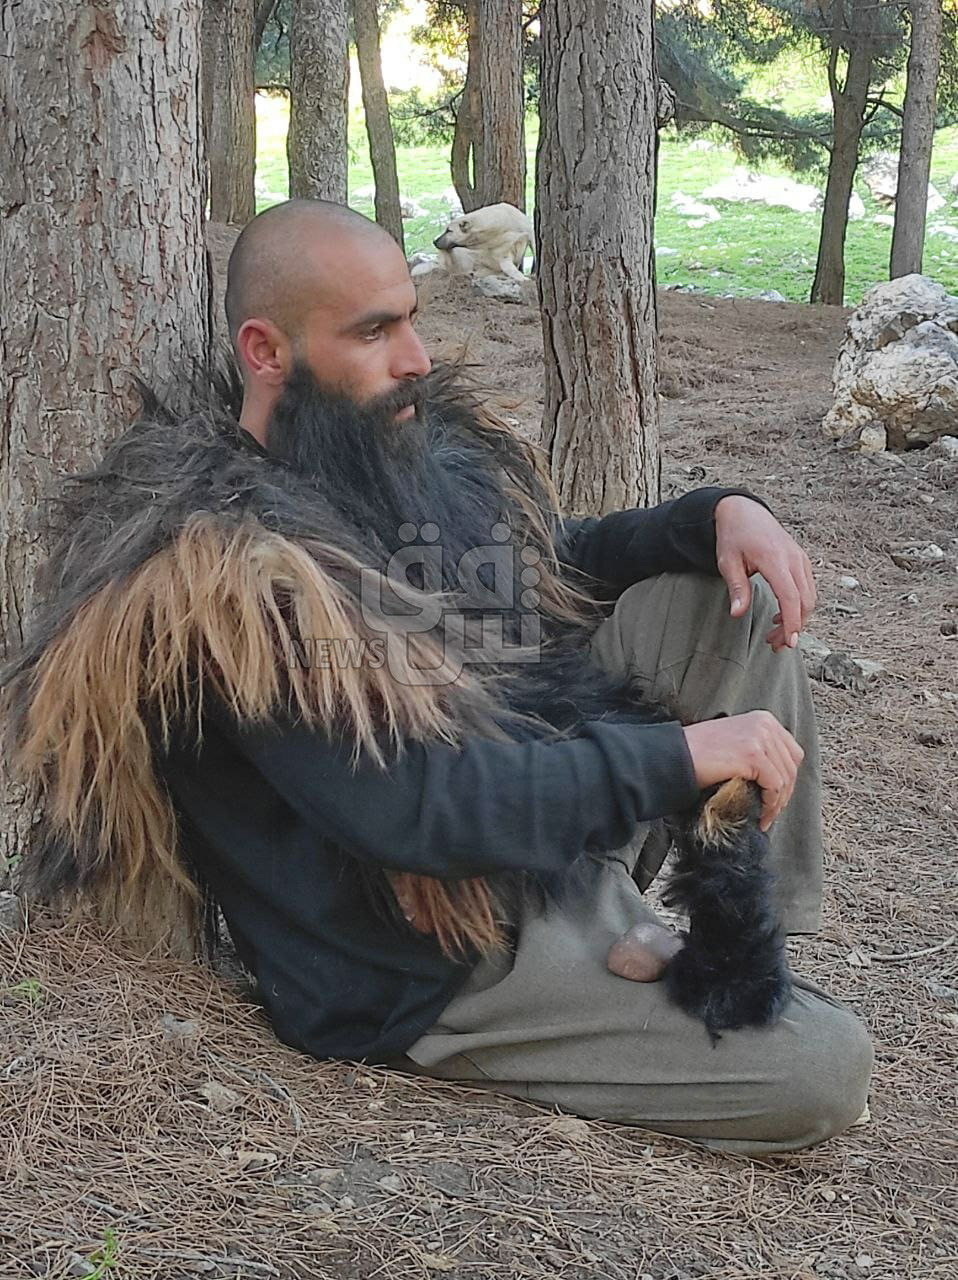 Modern-Day Neanderthal Embraces Primitive Lifestyle in Kurdistan's Forests